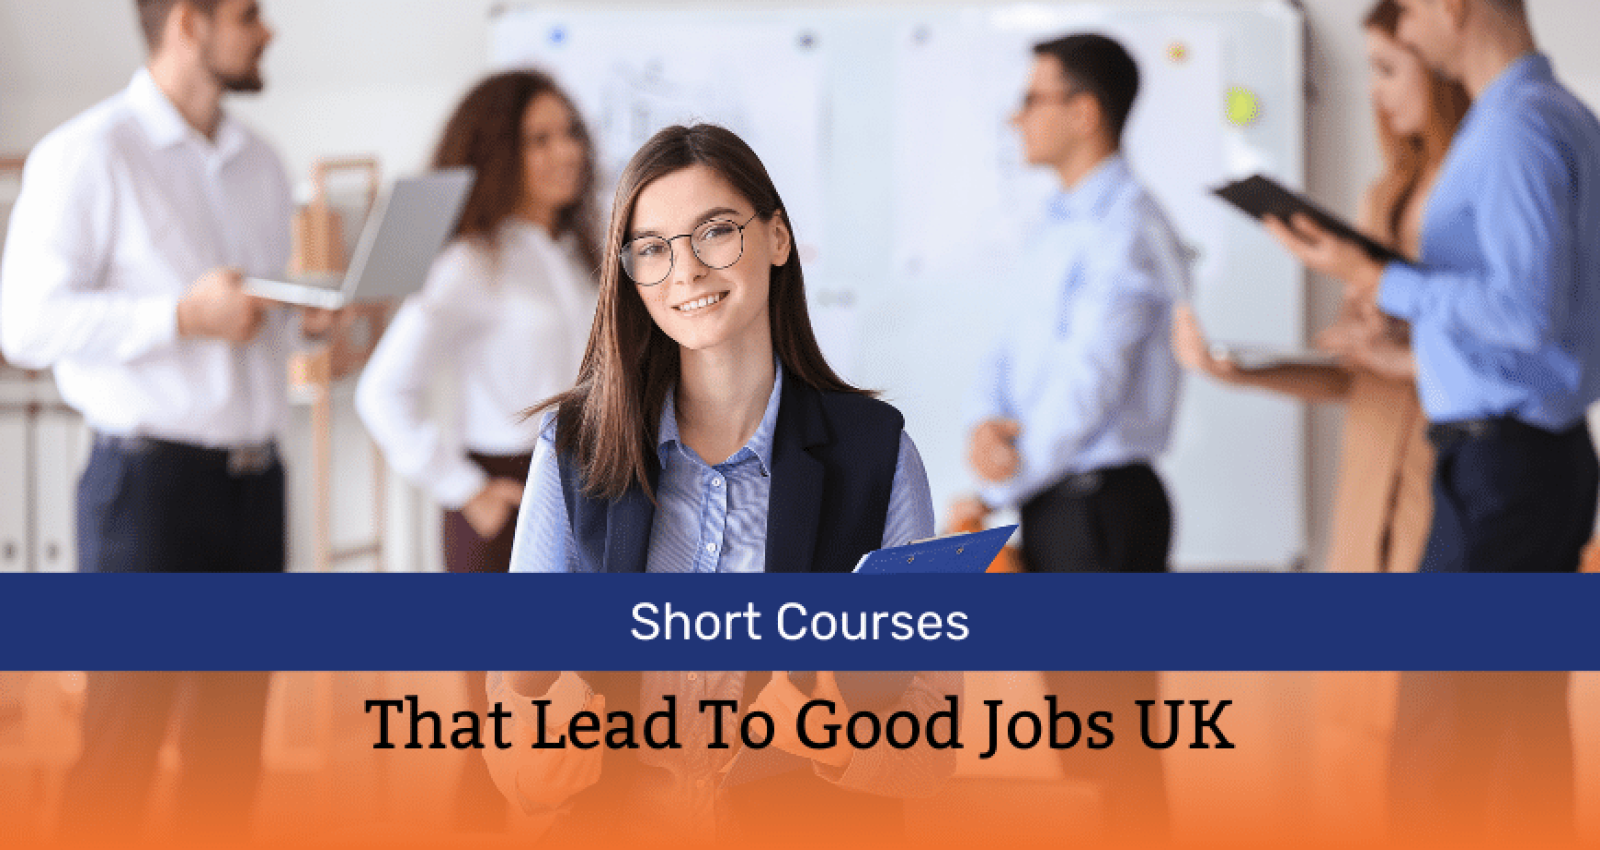 Short Courses That Lead To Good Jobs UK